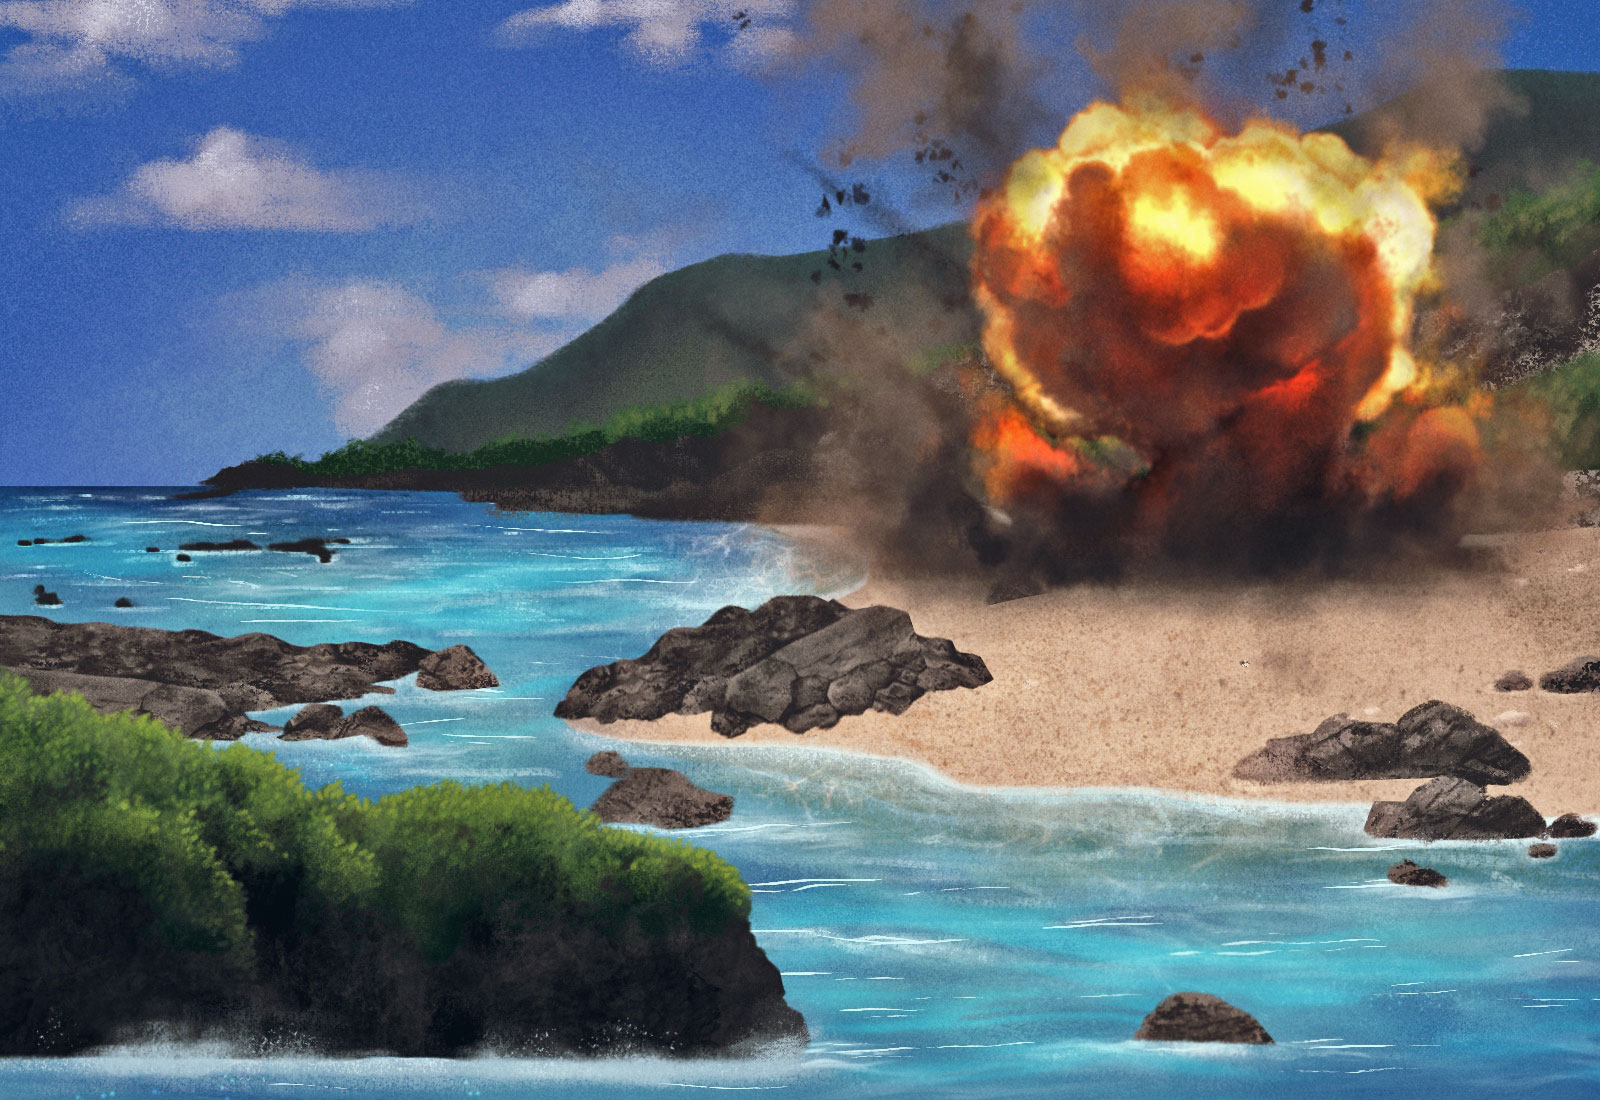 illustration of a large explosion on a beach with rocks and cliffs in the background